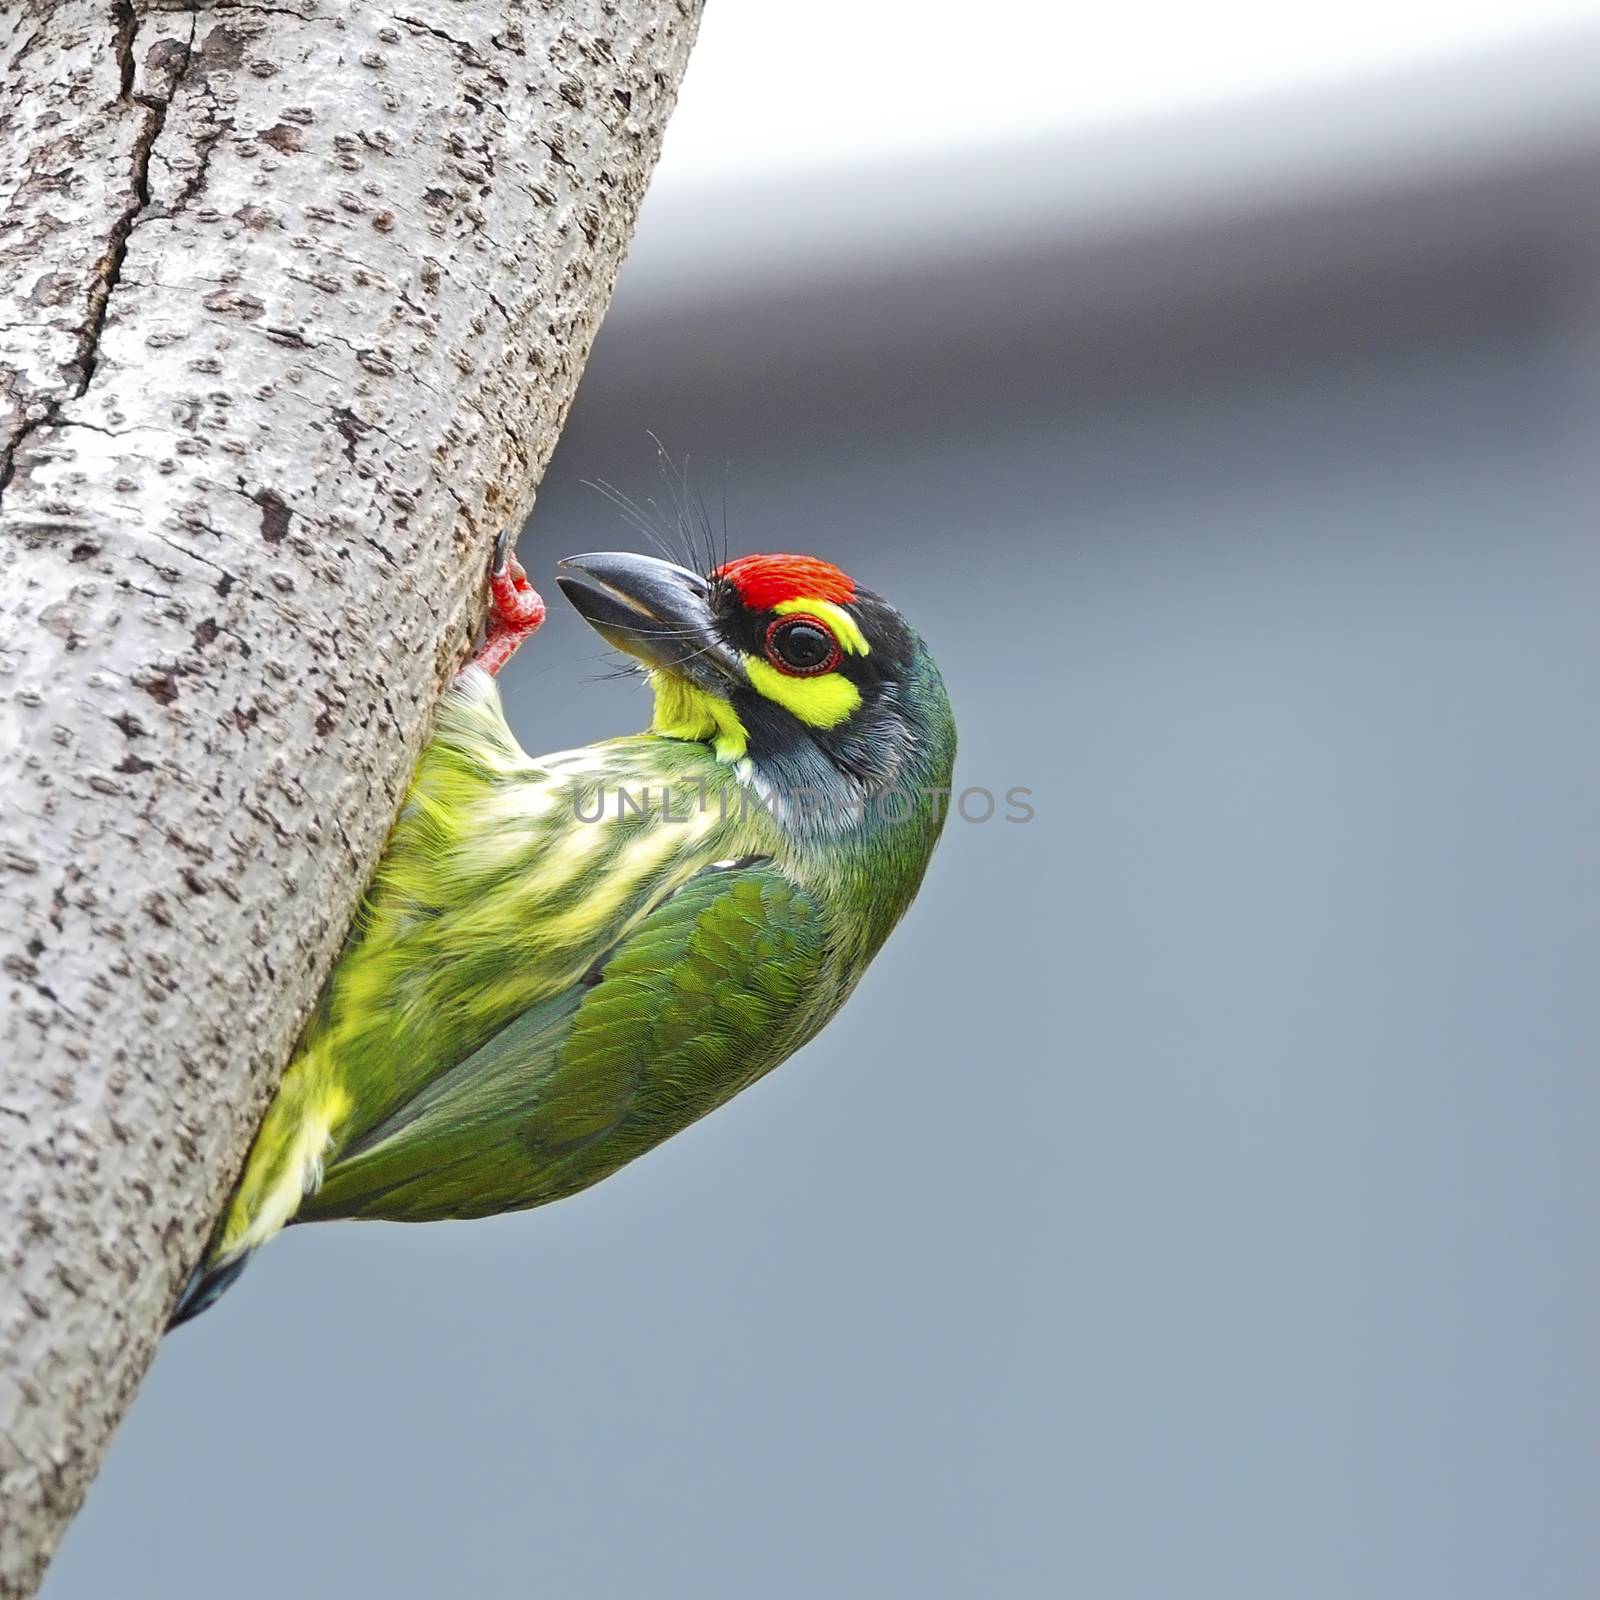 Colorful Barbet bird, Coppersmith Barbet (Megalaima haemacephala), standing on the tree